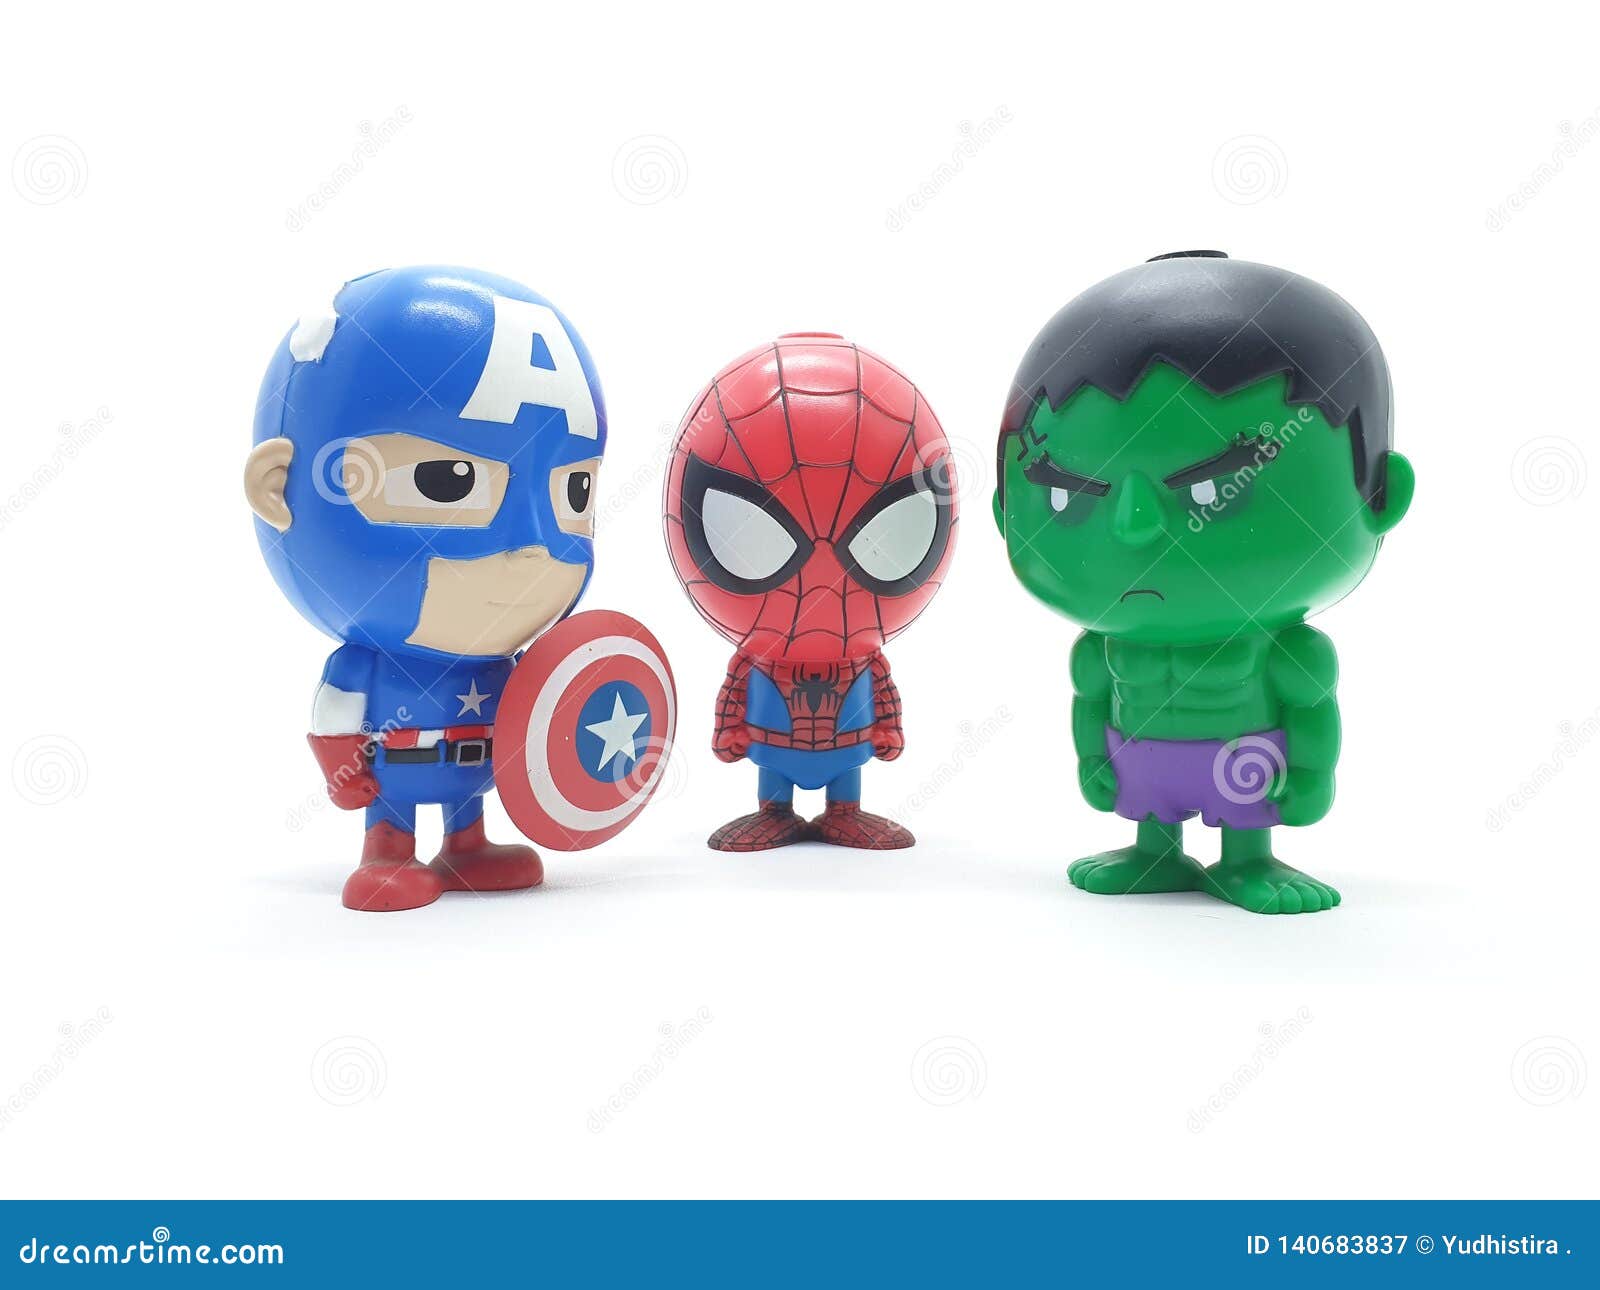 Avengers Hulk Spiderman Captain America Plastic from Movie Toys Model in  White Isolated Background Editorial Photography - Image of america, artist:  140683837